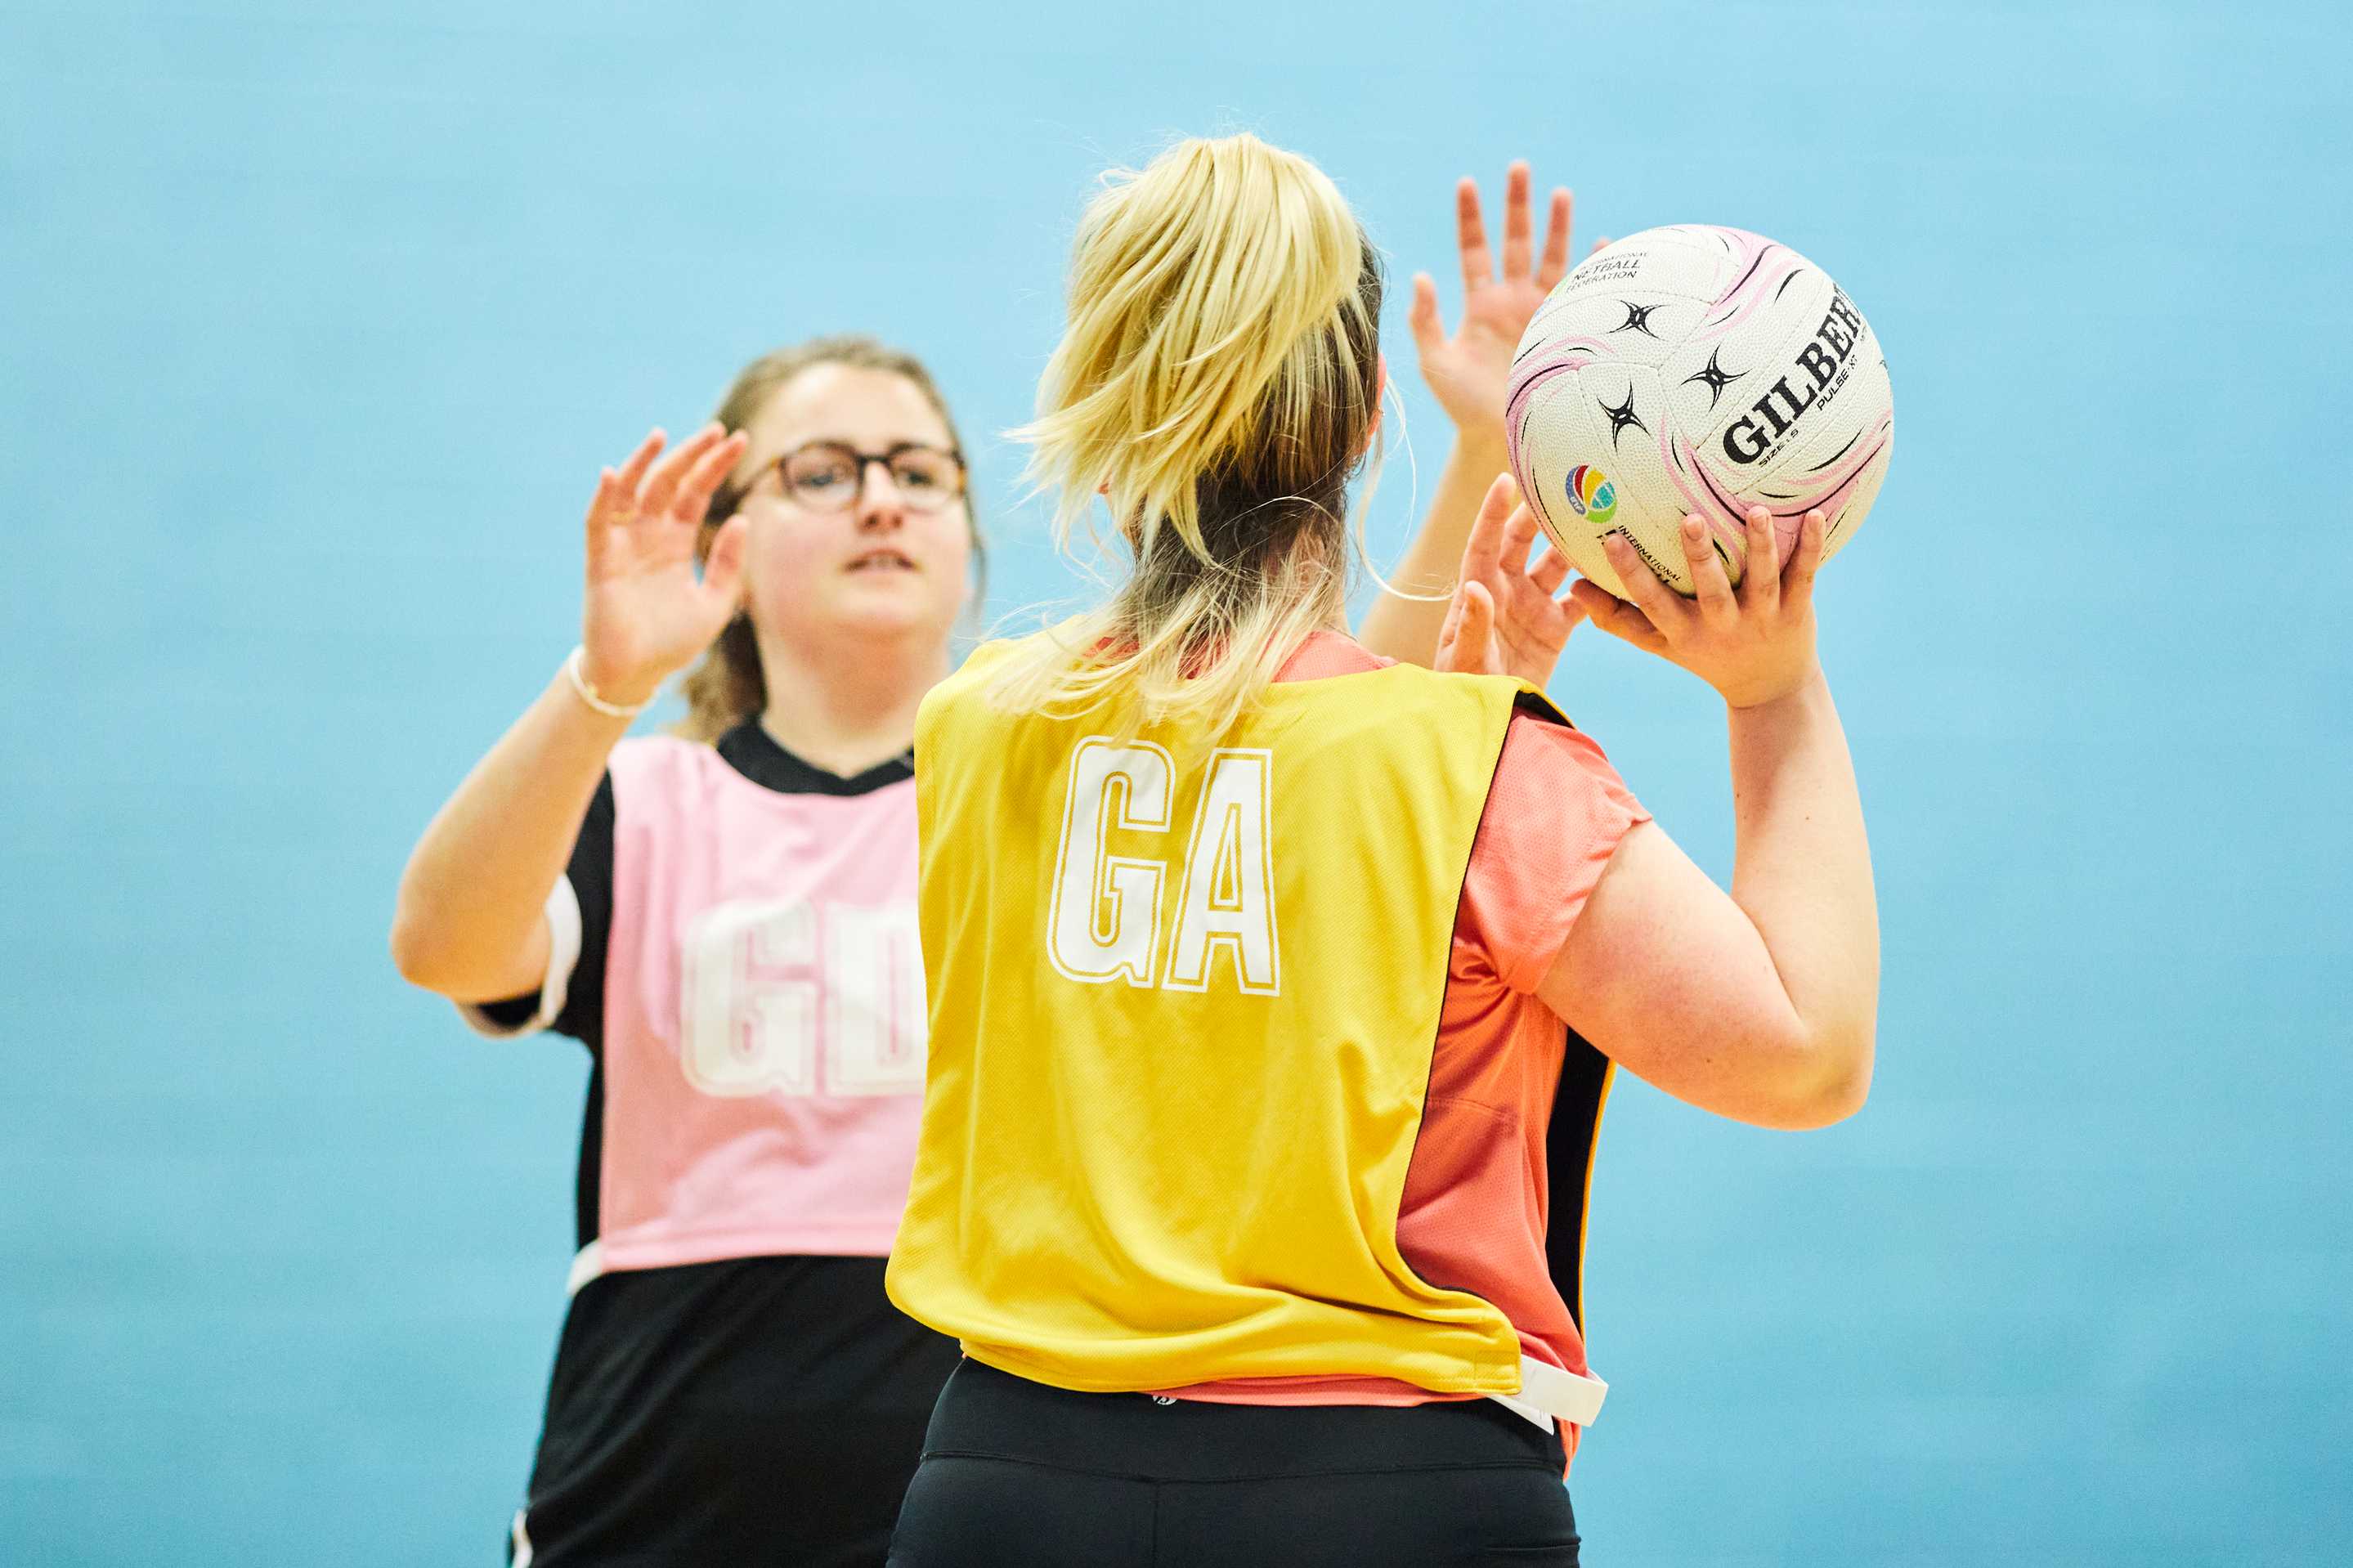 Two students playing netball